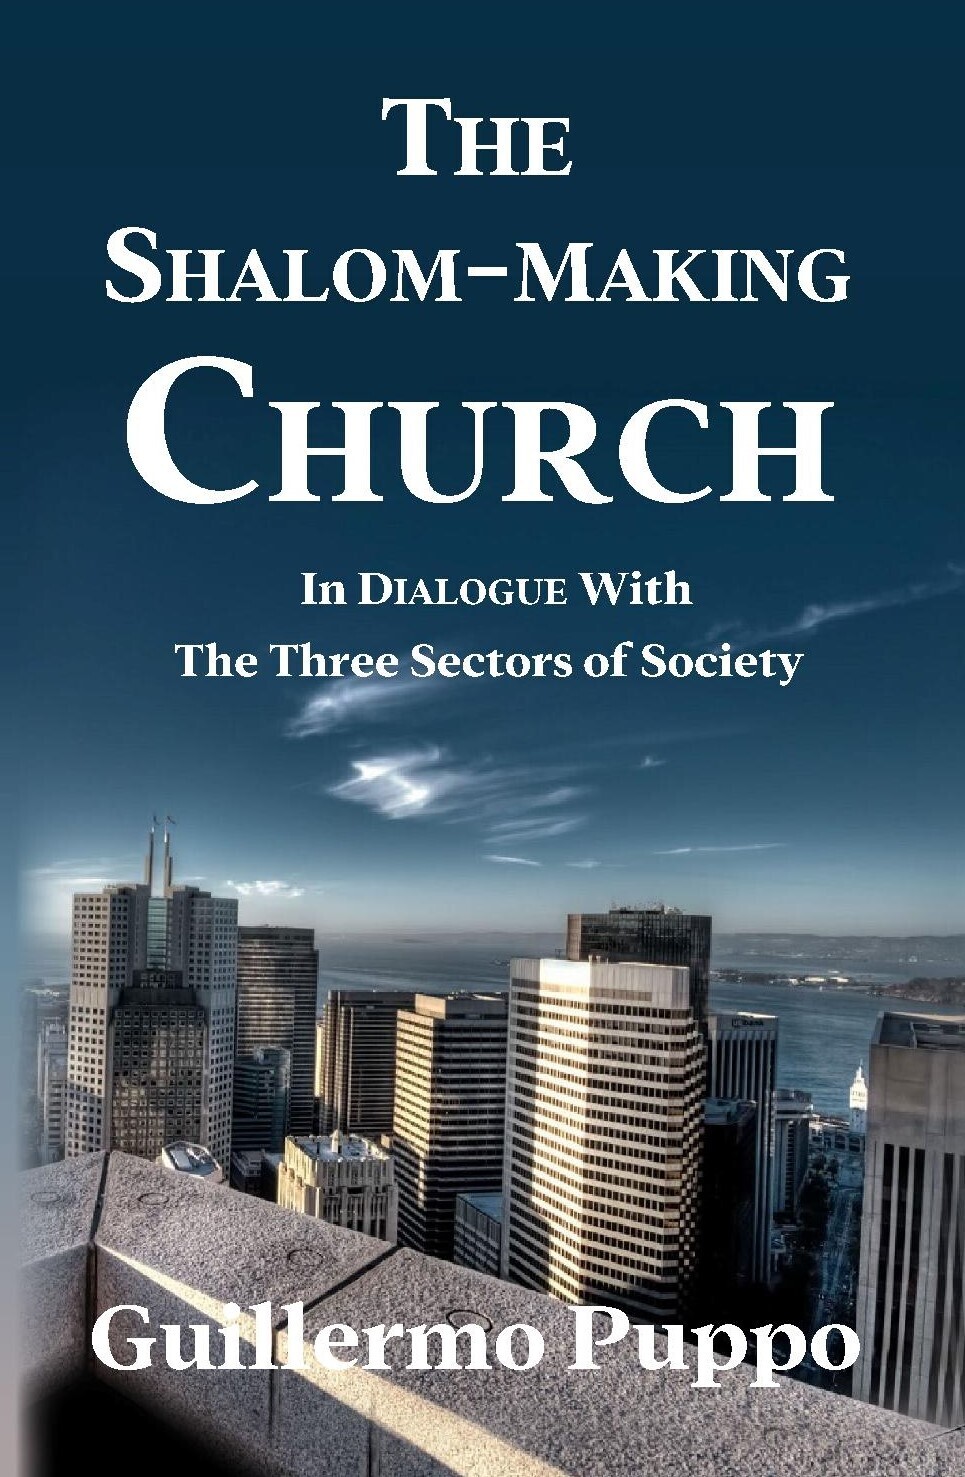 The Shalom-making Church: In Dialogue With the Three Sectors of Society by Guillermo Puppo (Case-Bound)